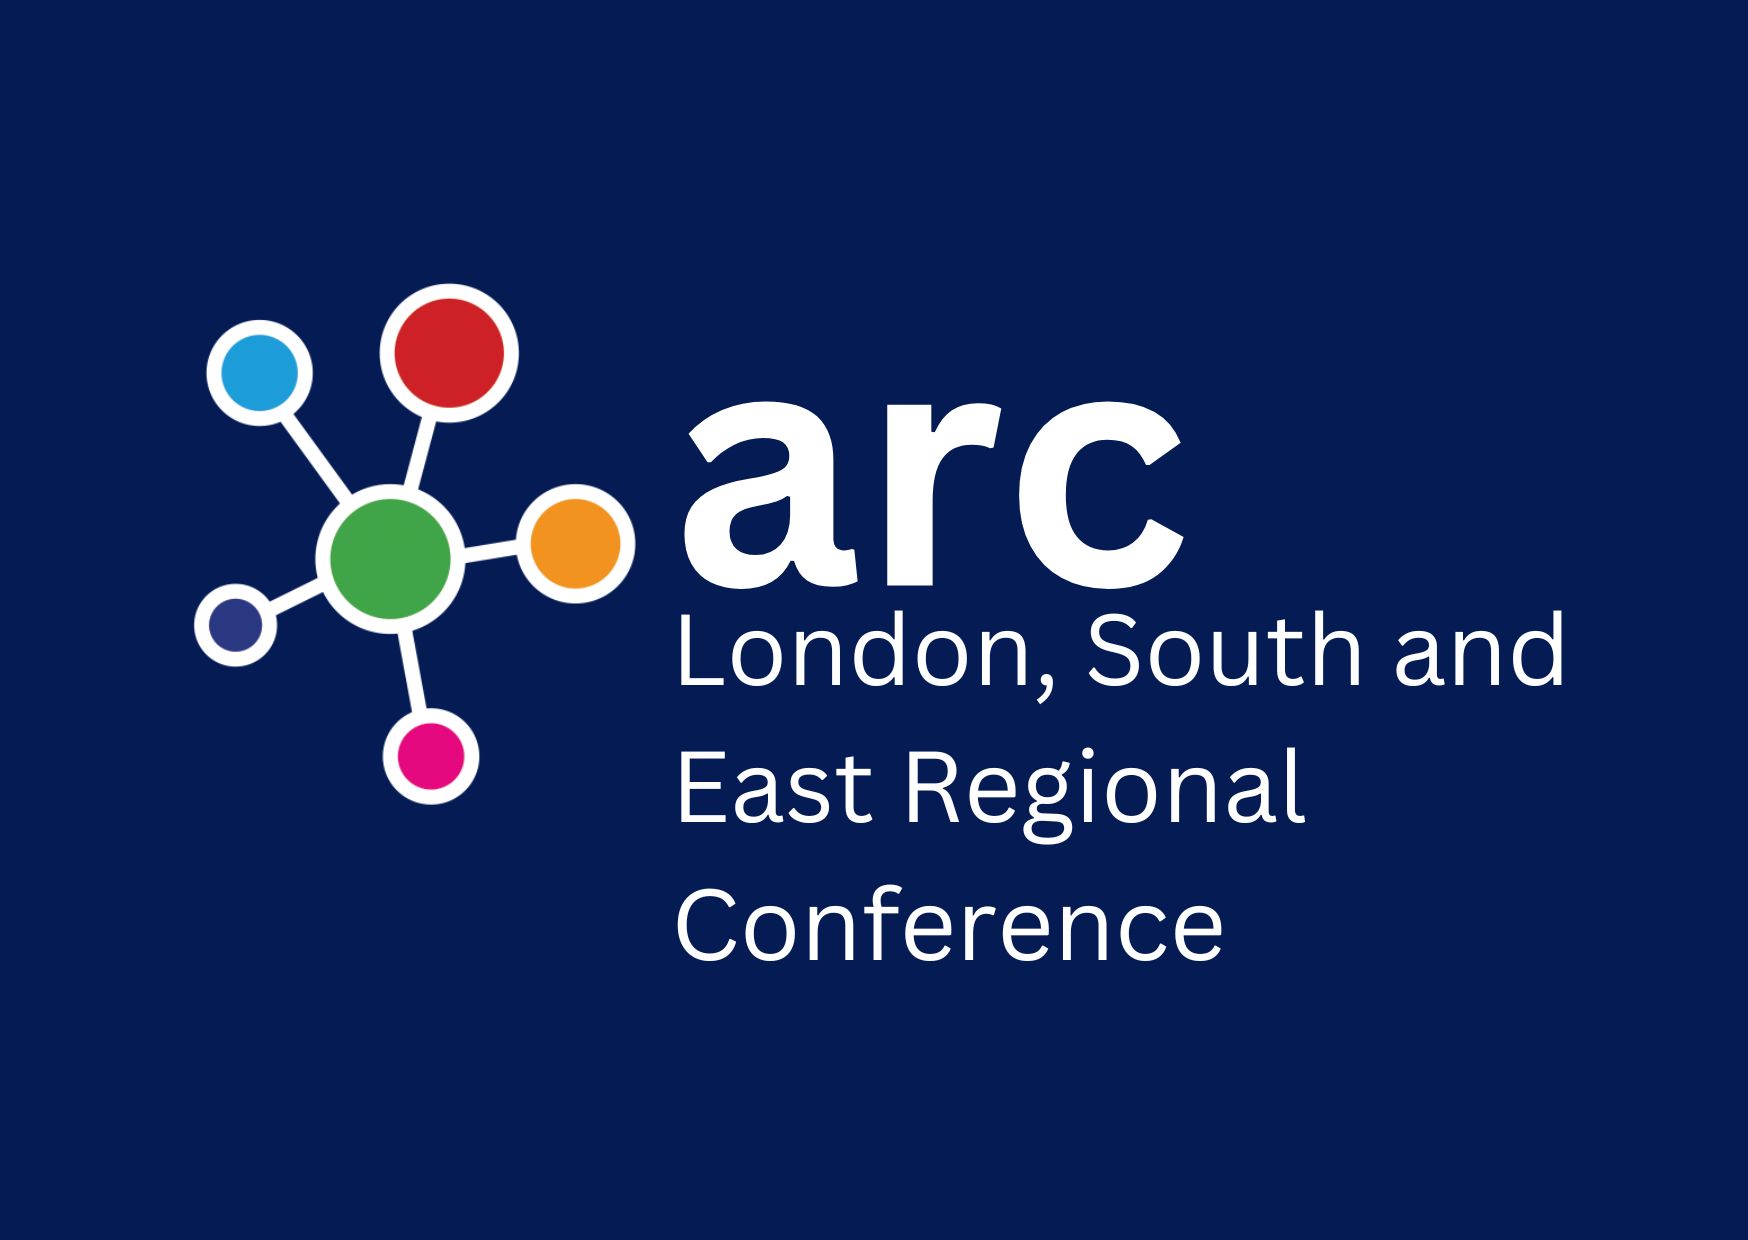 ARC London, South and East Regional Conference